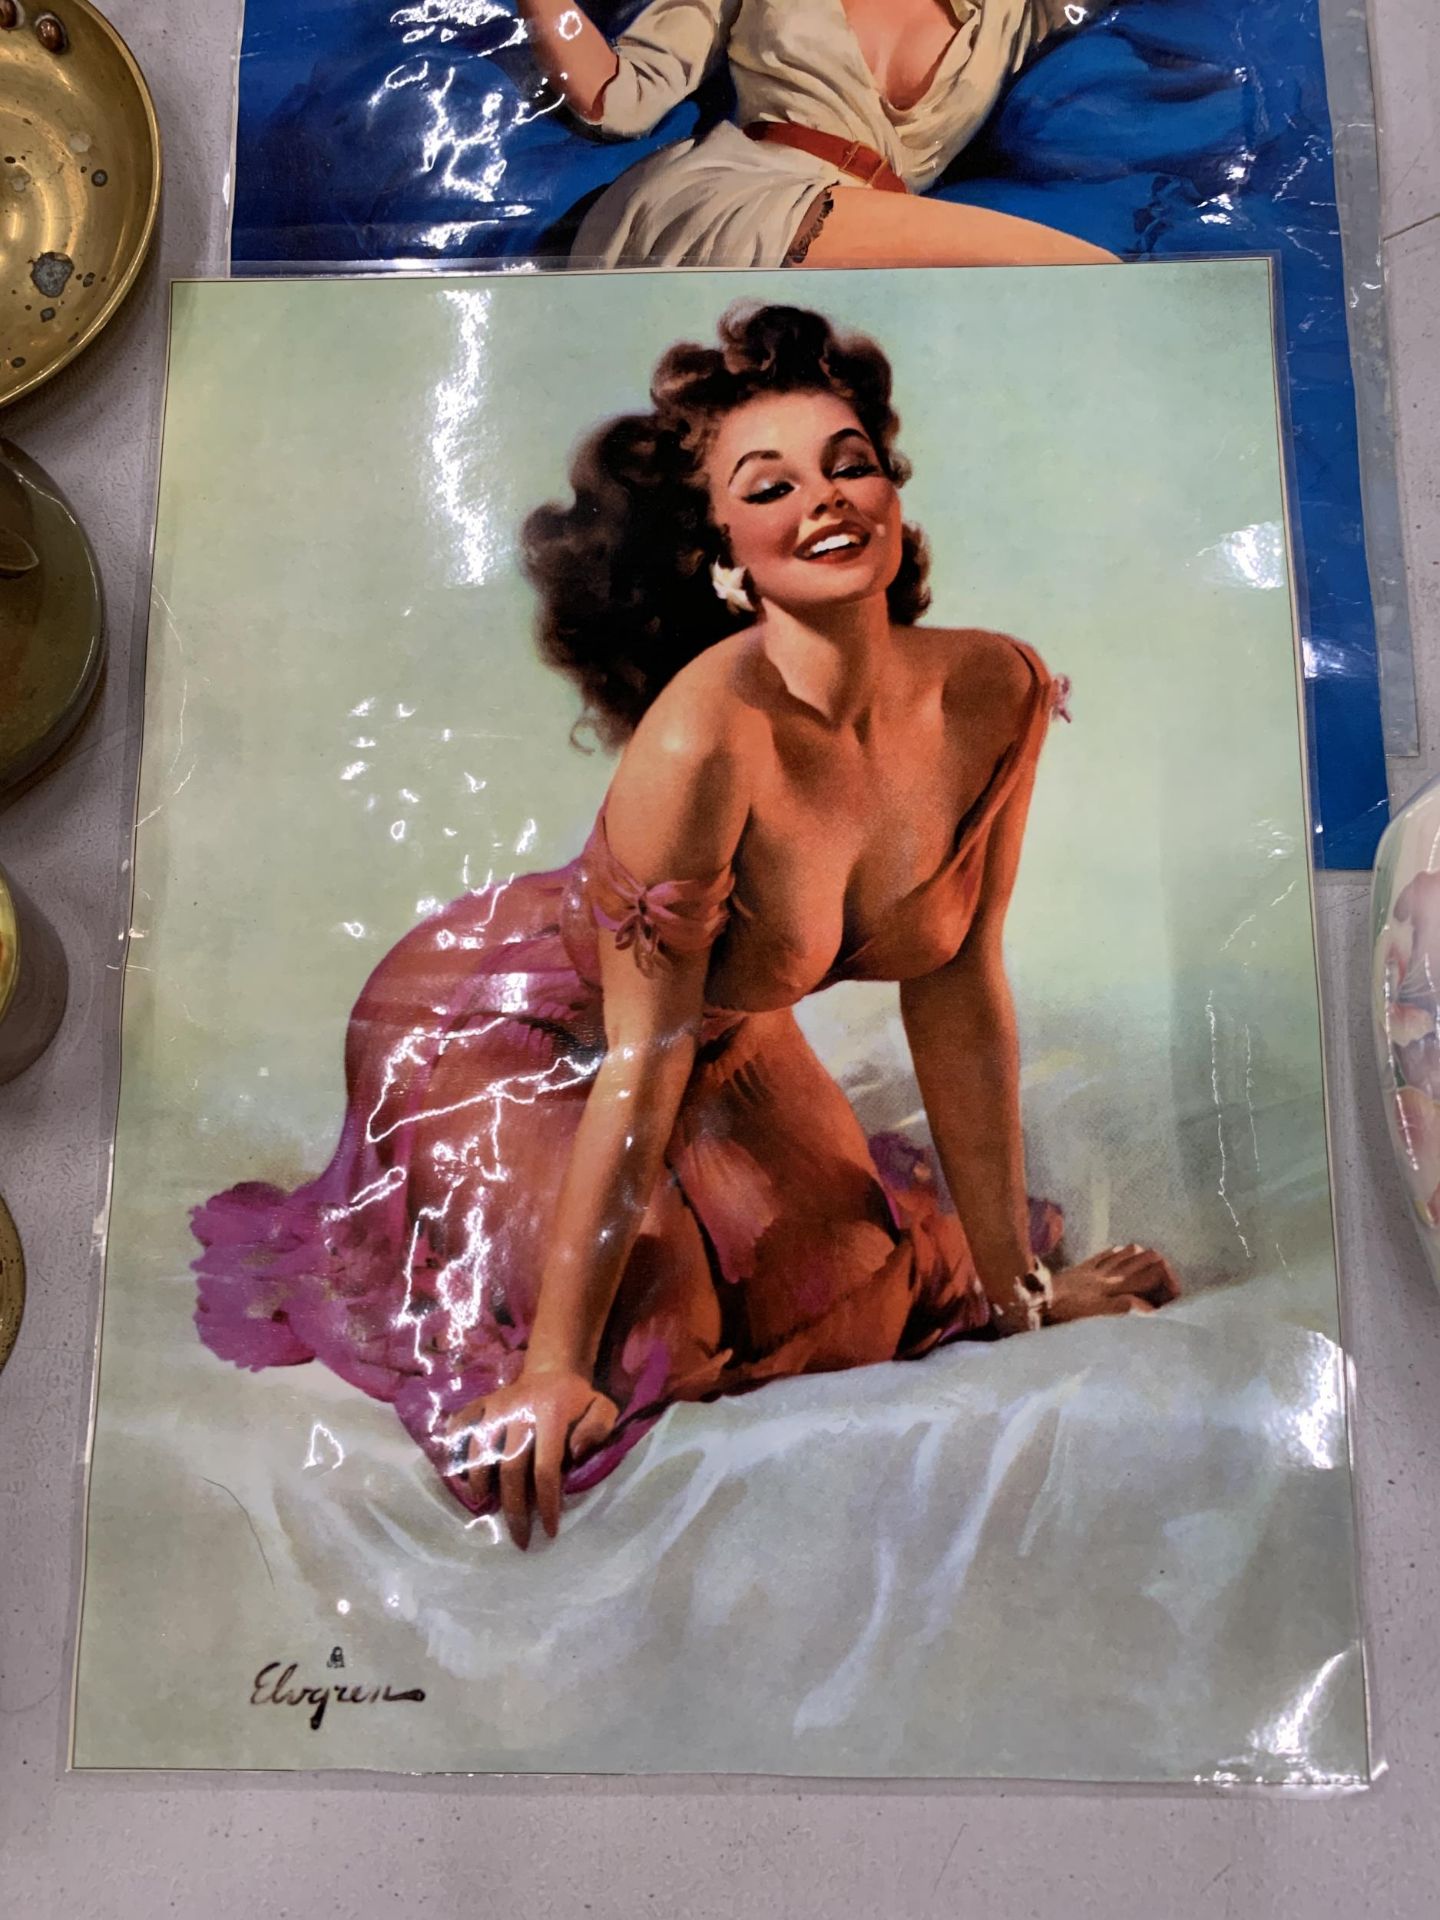 SEVEN VINTAGE PIN-UP GIRL PRINTS BY THE FRENCH ARTIST GIL ELVGREN - Image 2 of 5